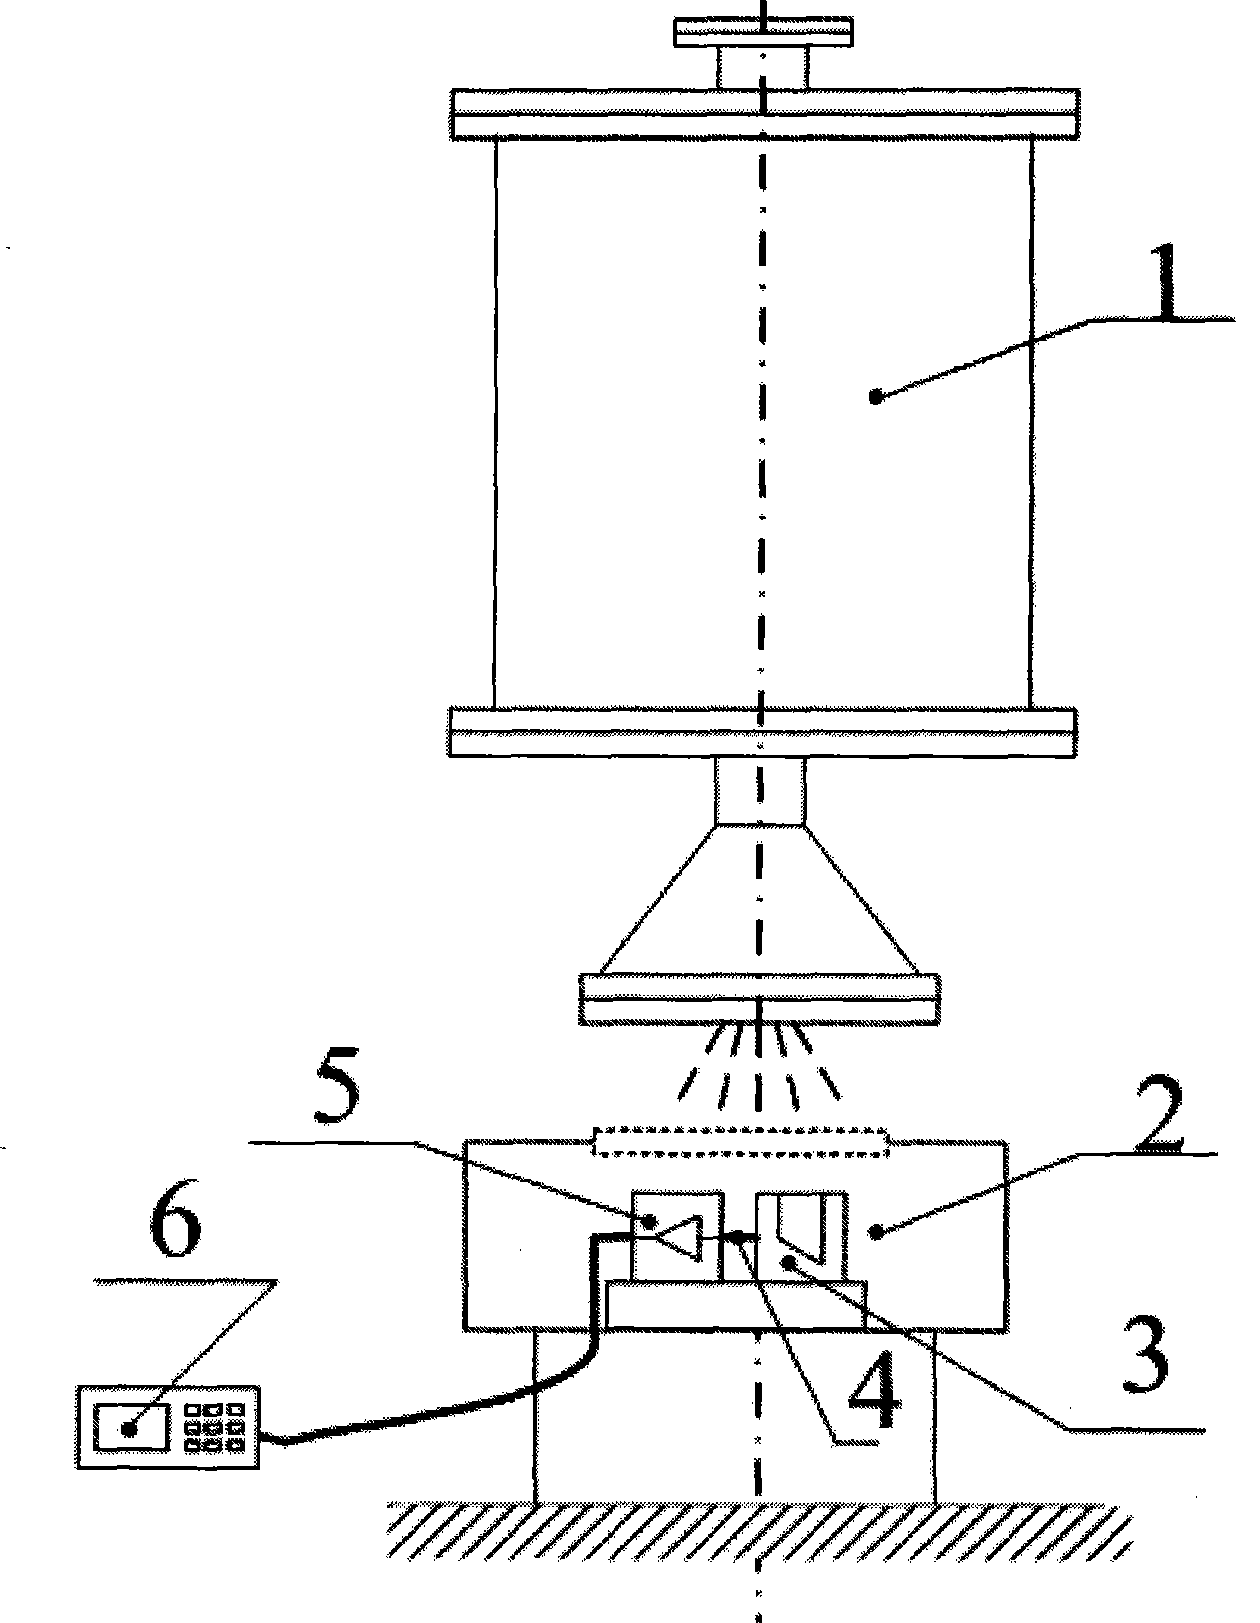 Measuring system for nA/pA electronic beam current of impulse electron accelerator